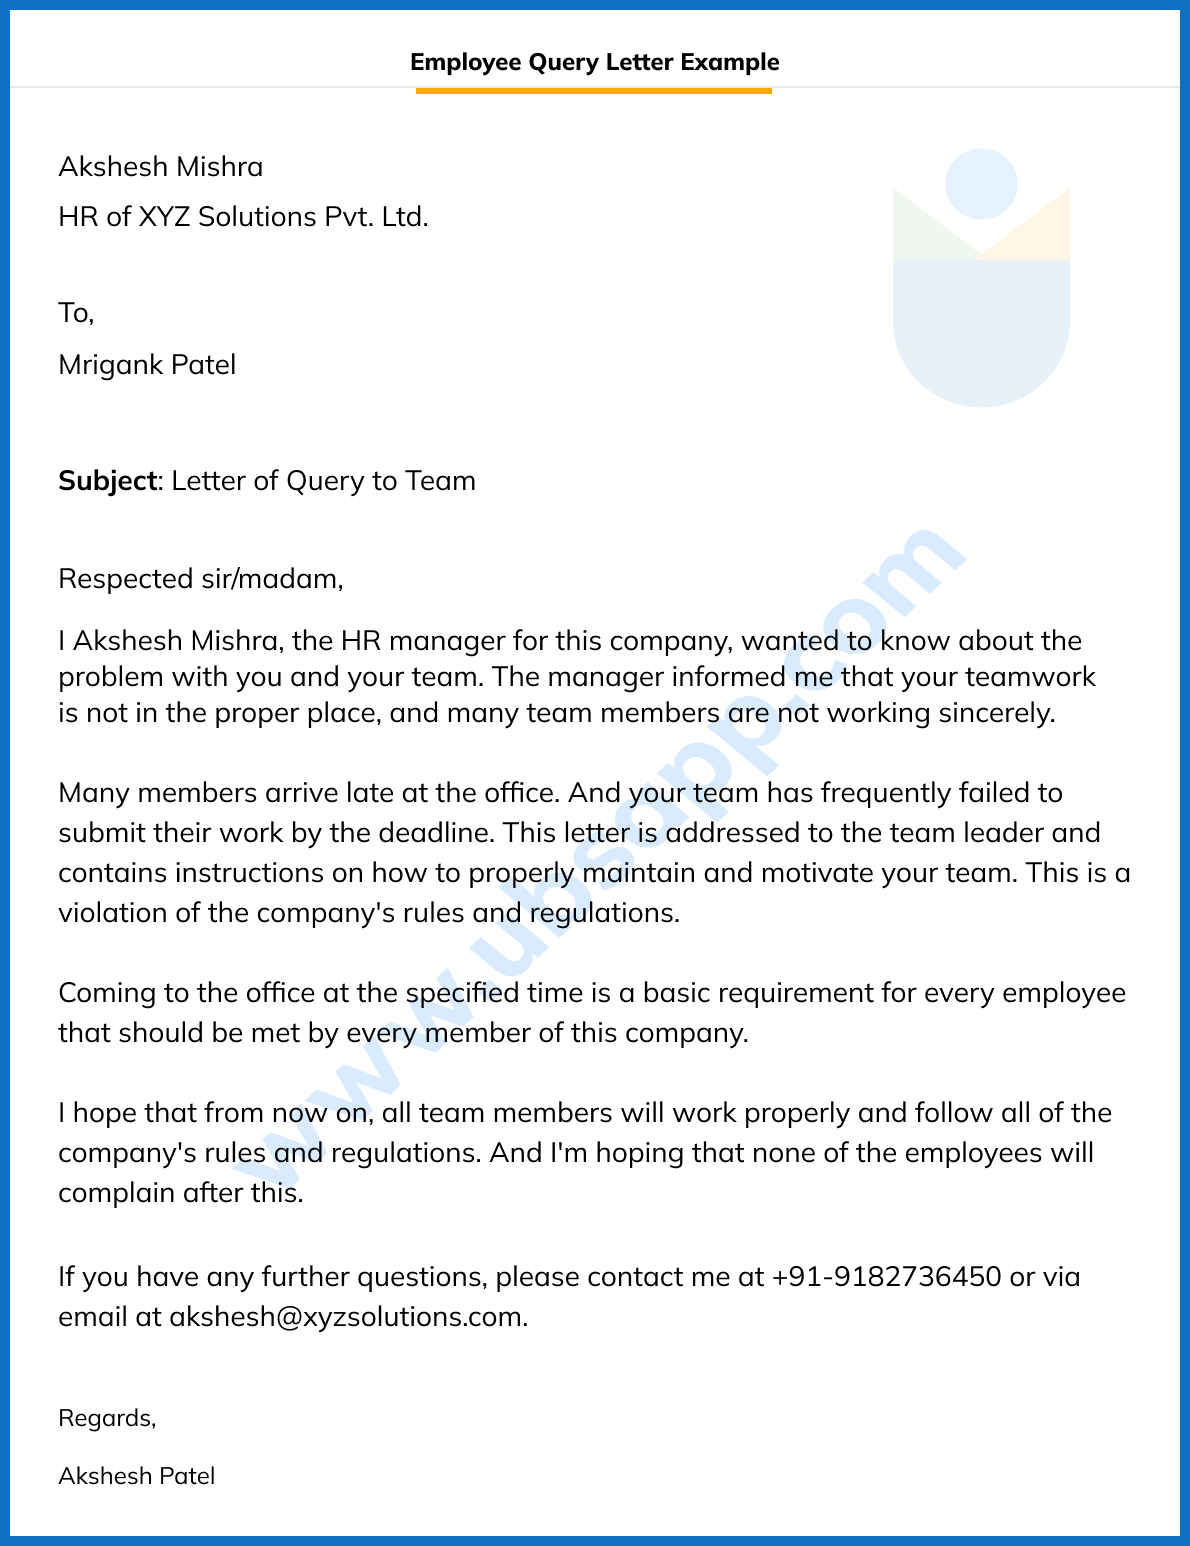 Employee Query Letter Example